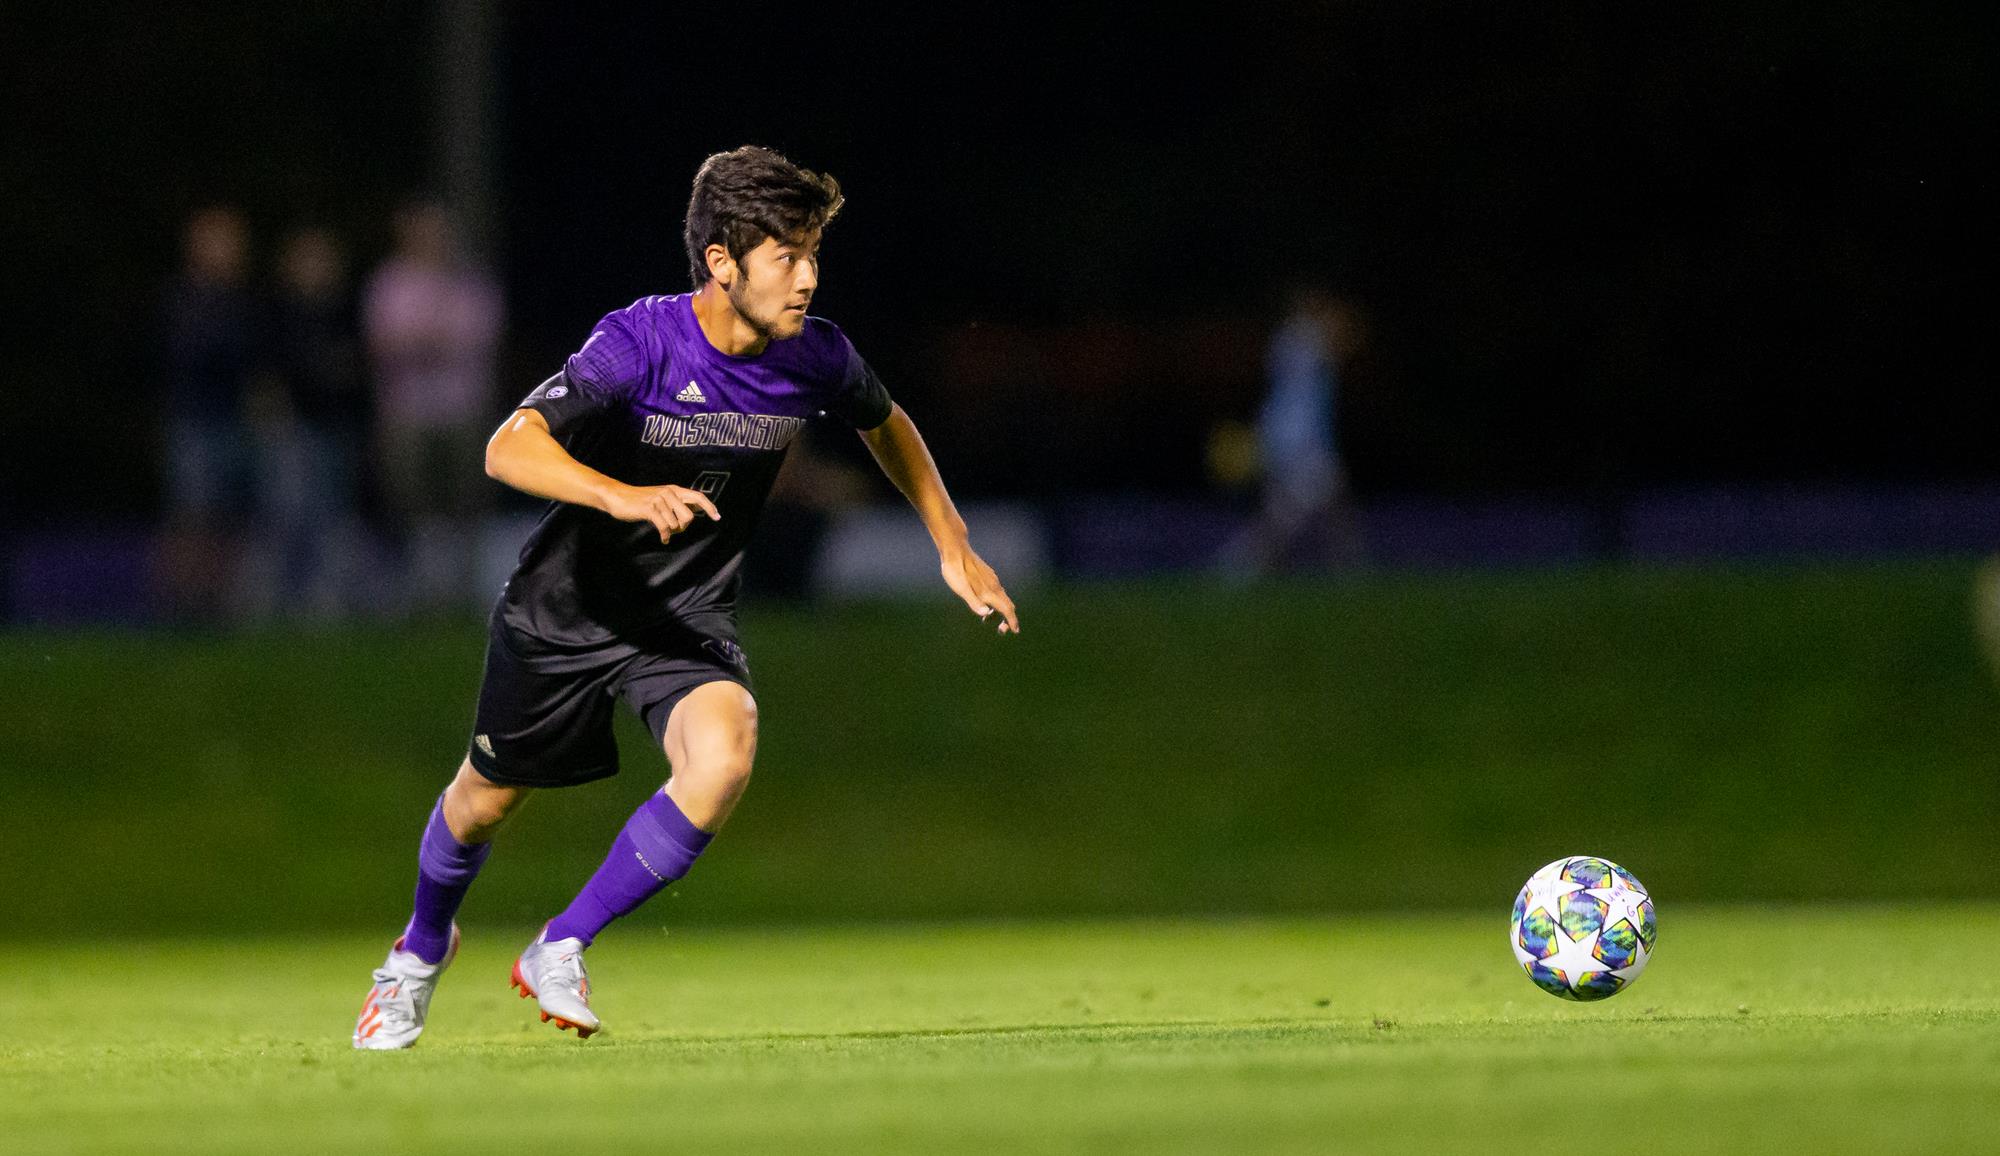 Teves joins Sounders on Homegrown deal